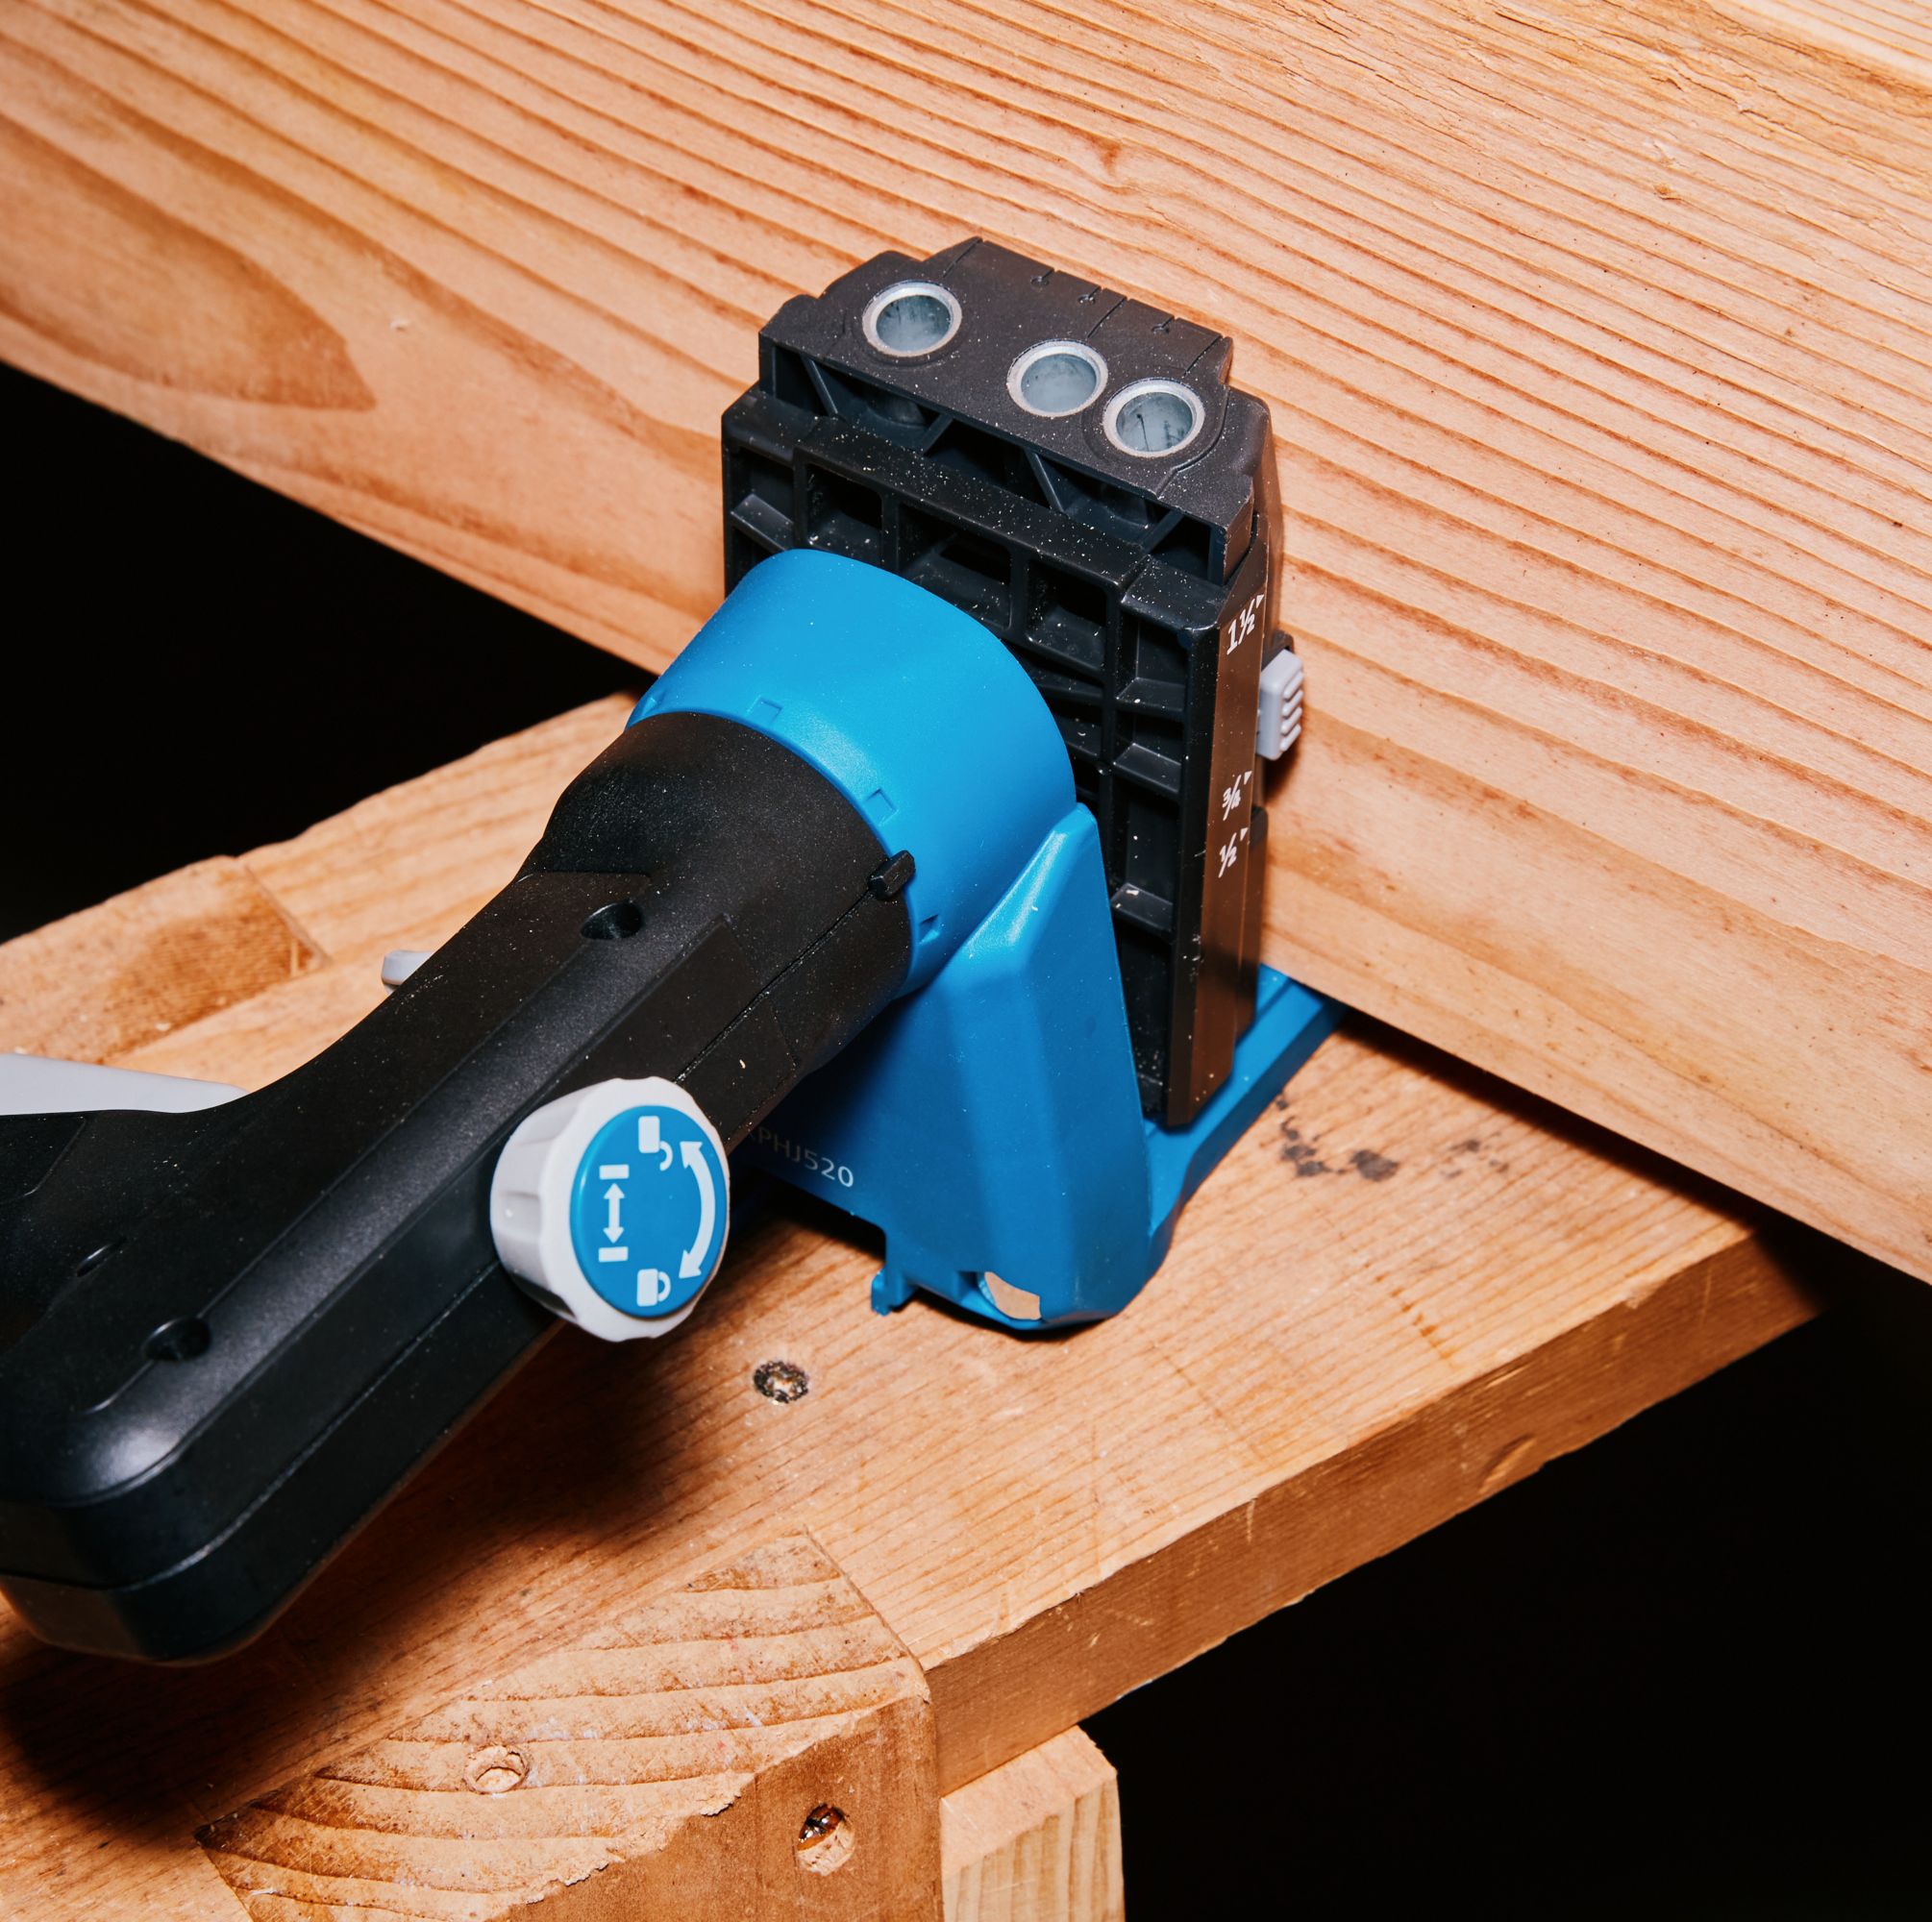 Kreg's 520 Pro Pocket Screw Jig is the Best Way to Join Two Pieces of Wood